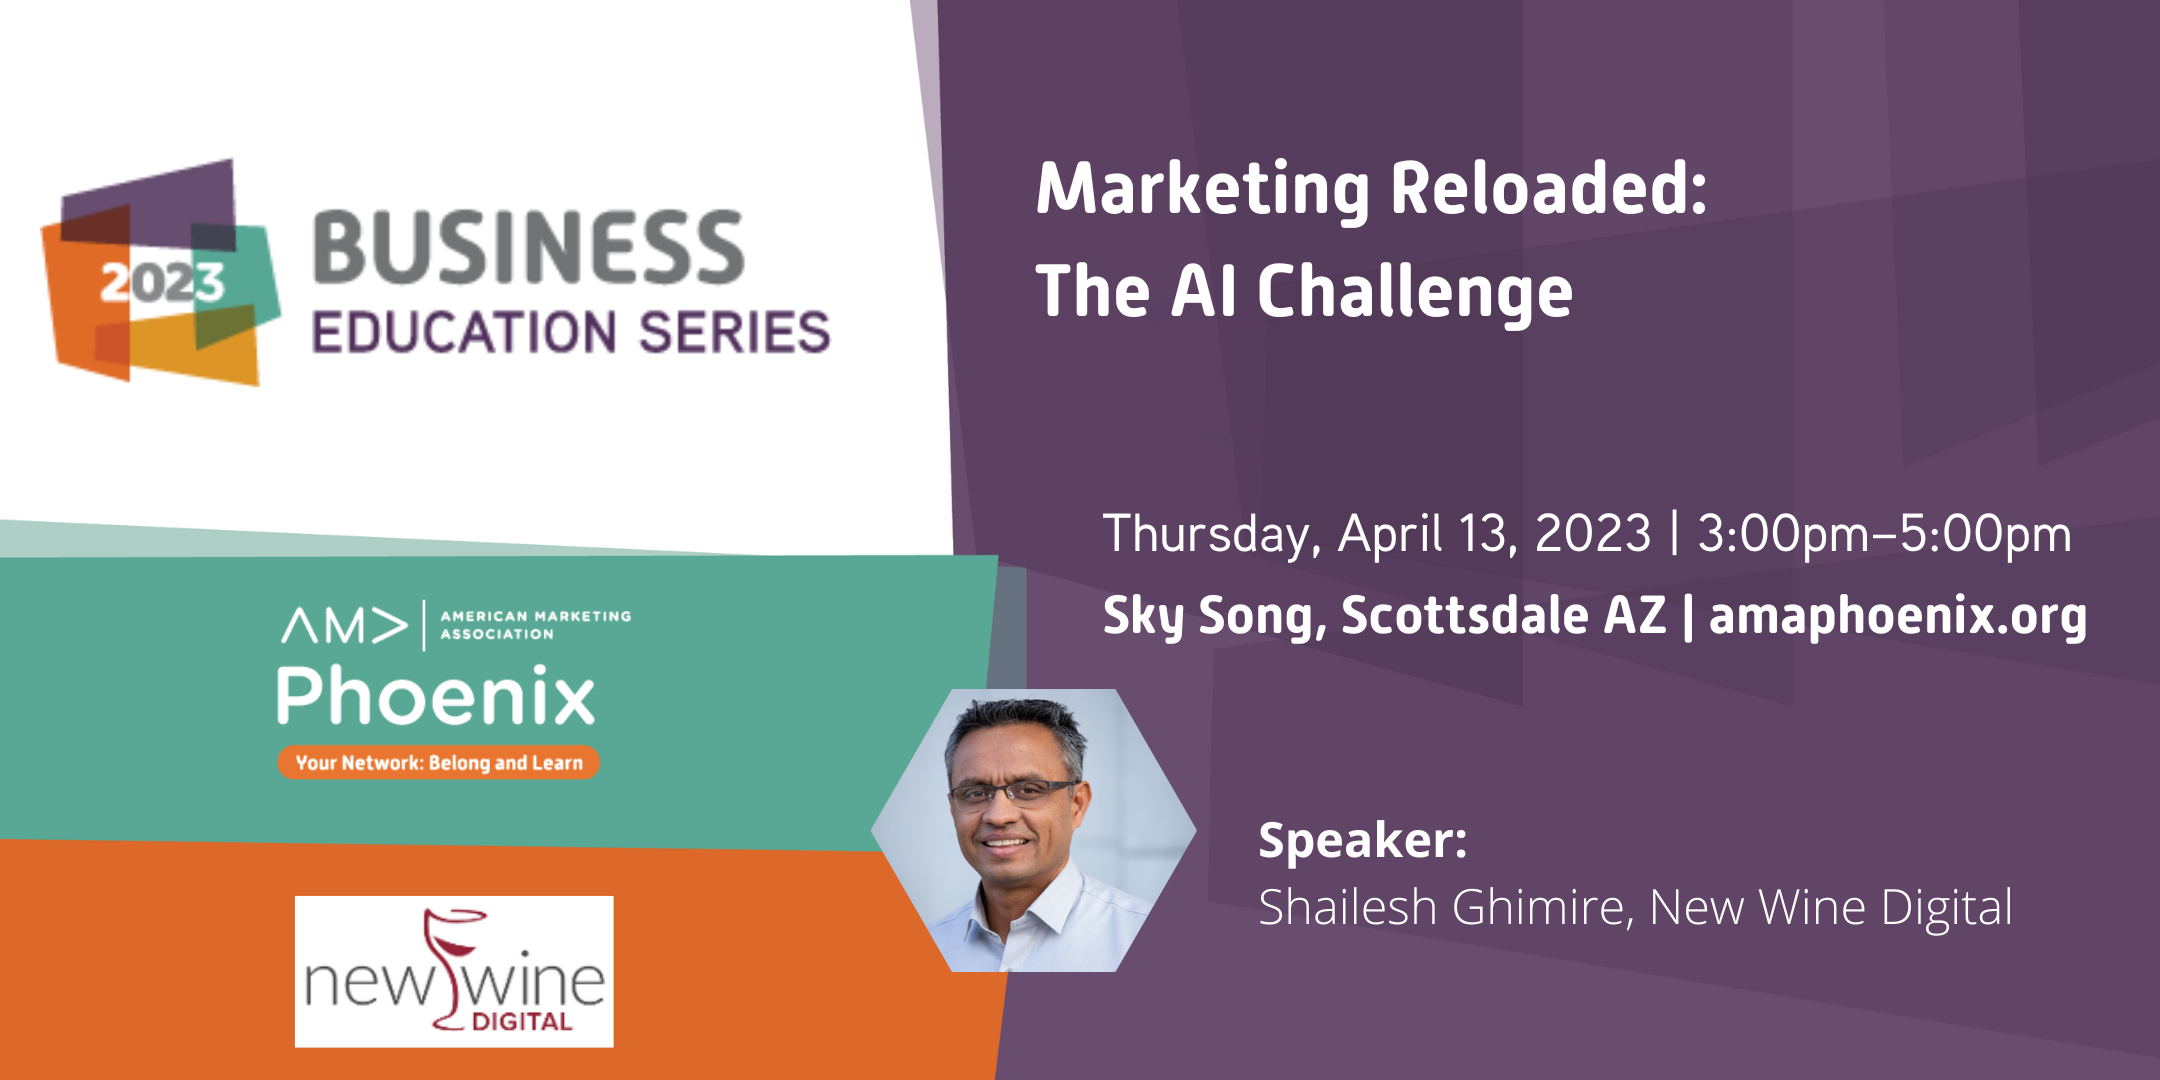 Marketing Reloaded: The AI Challenge